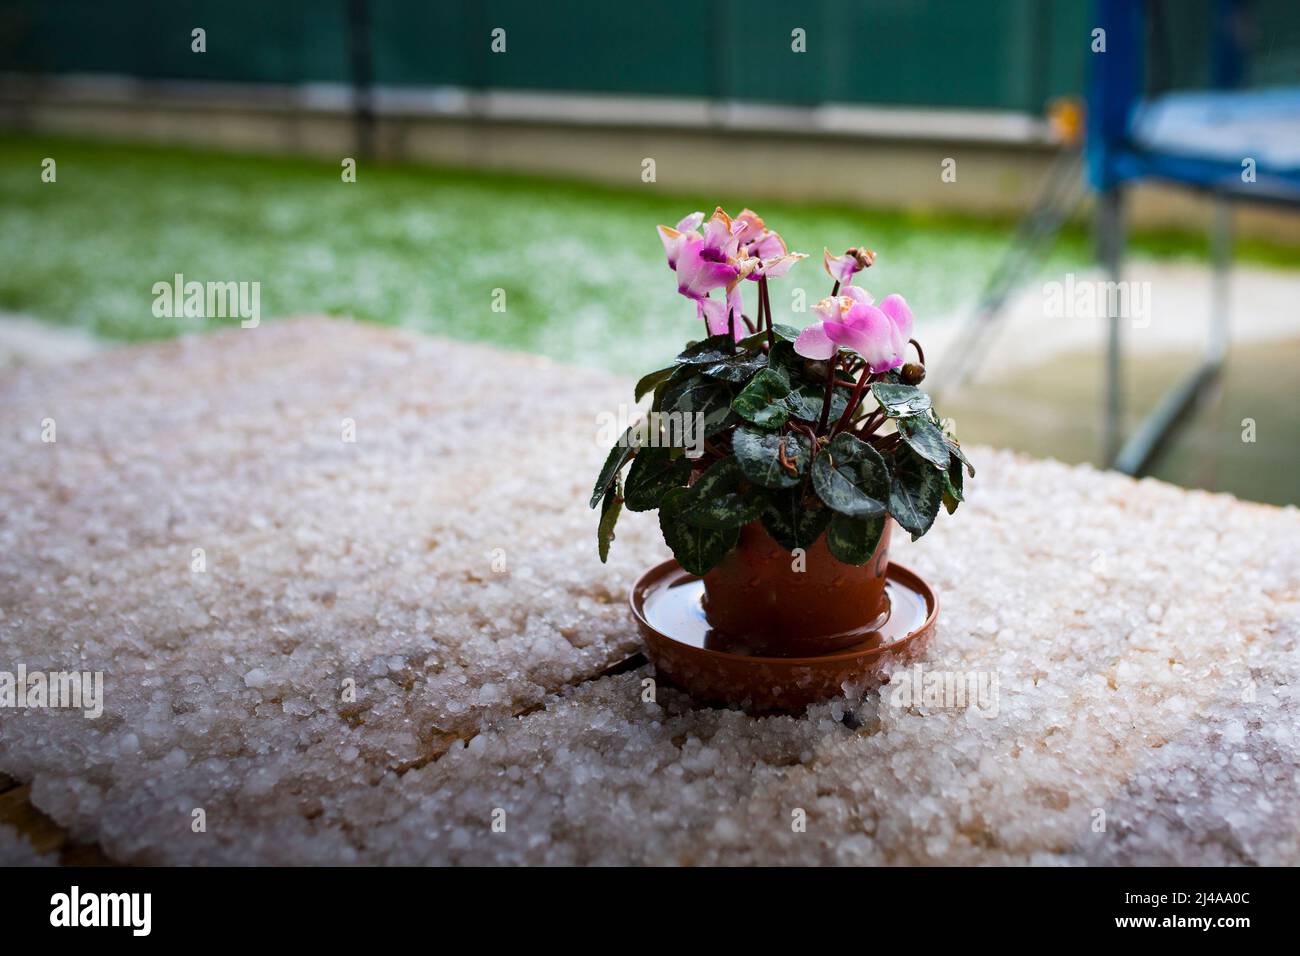 Lilac flower pot on outdoor table covered in hail after a storm. Extreme hailstorms are caused by climate change and global warming. Background with c Stock Photo